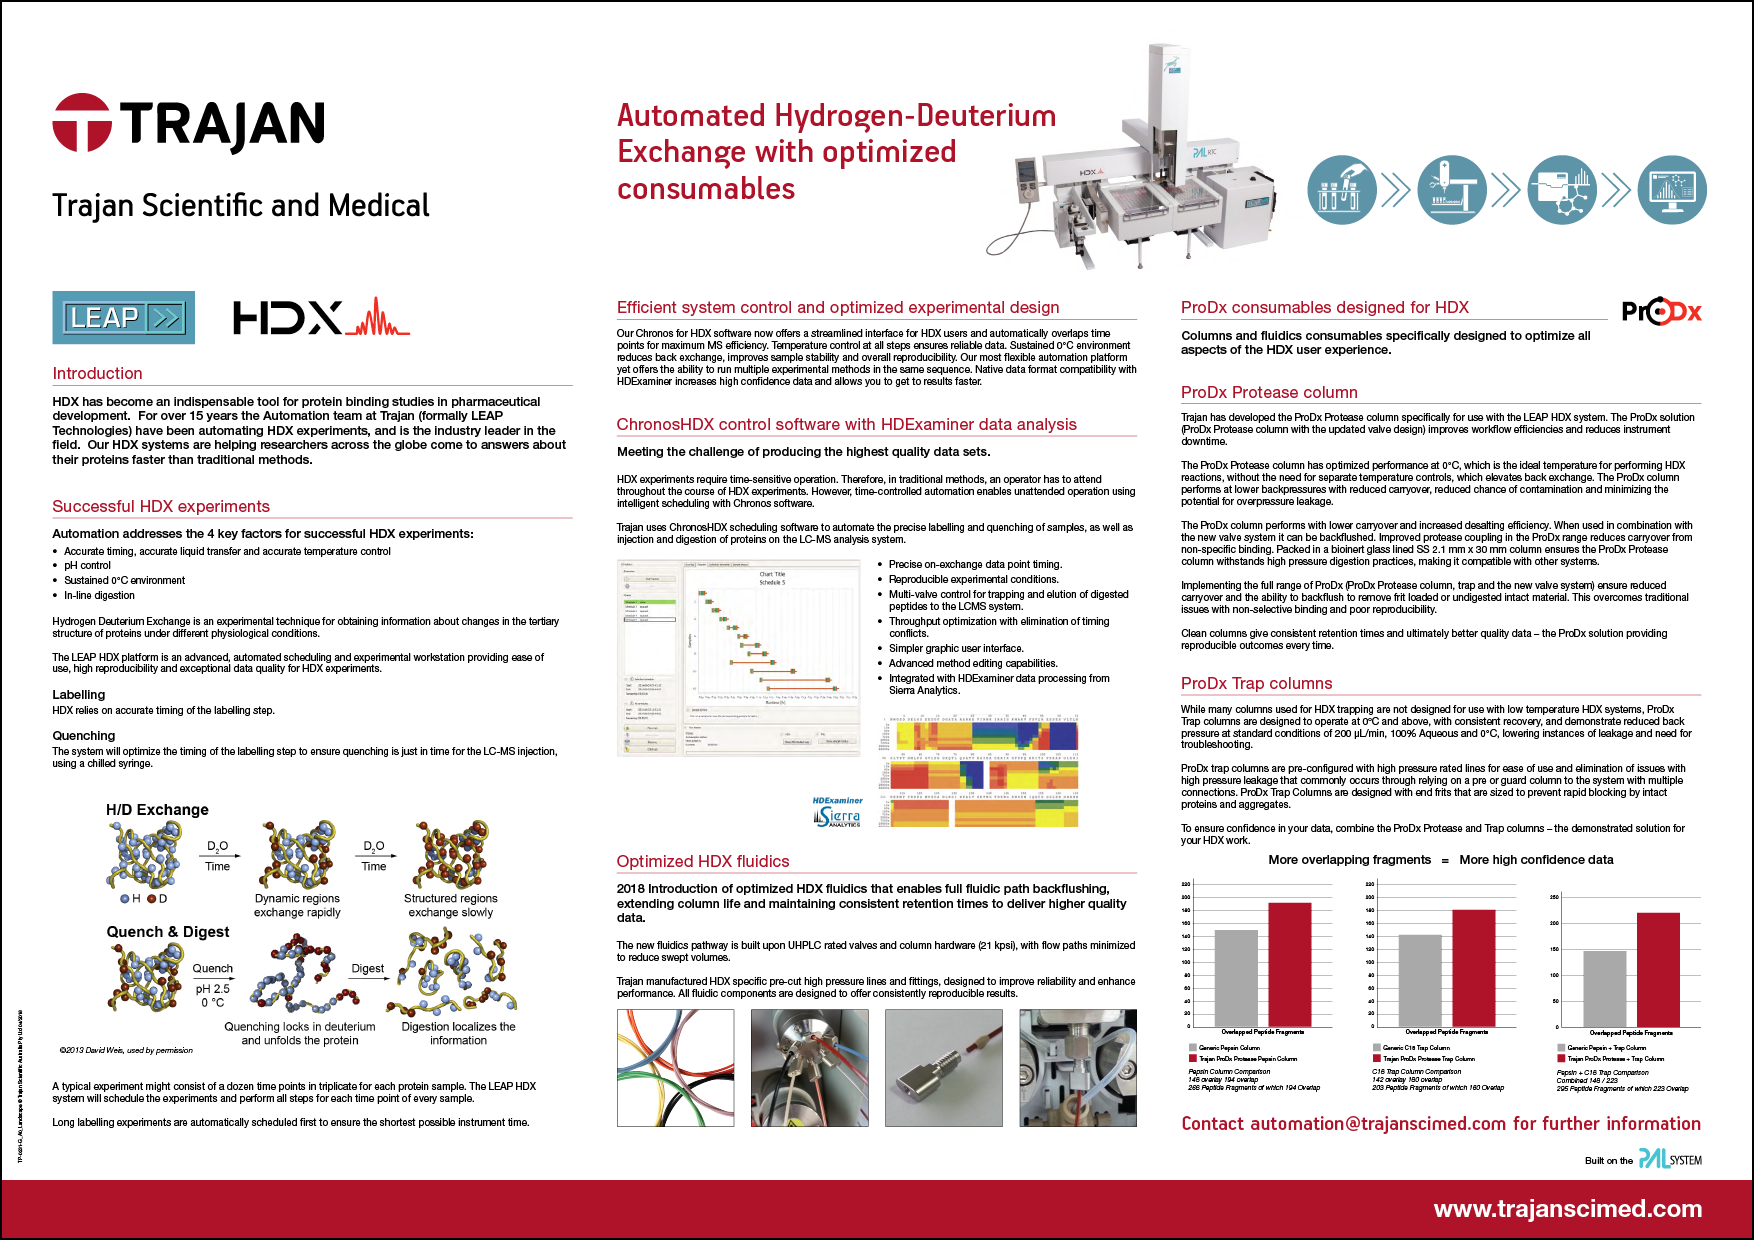 Technical Poster - Automated Hydrogen-Deuterium Exchange with optimized consumables